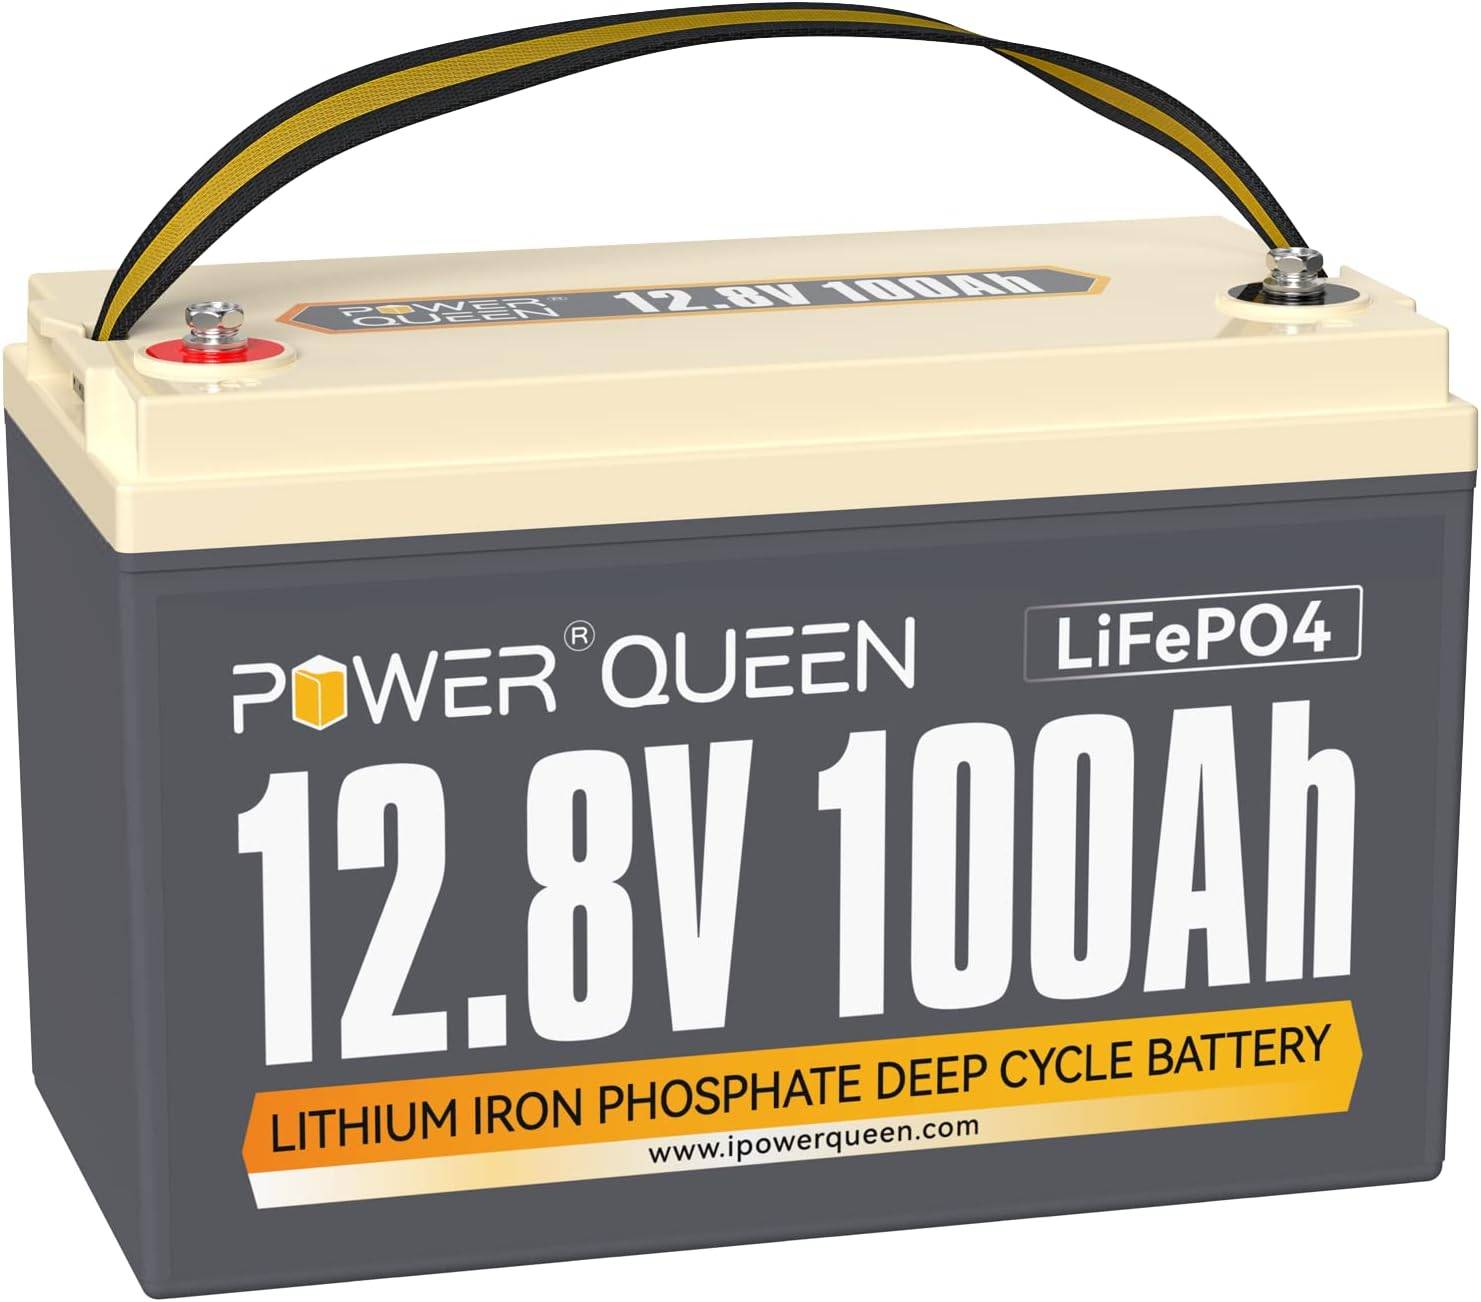 Power Queen Lifepo4 Battery Review: Reliable and High Capacity Power Solution